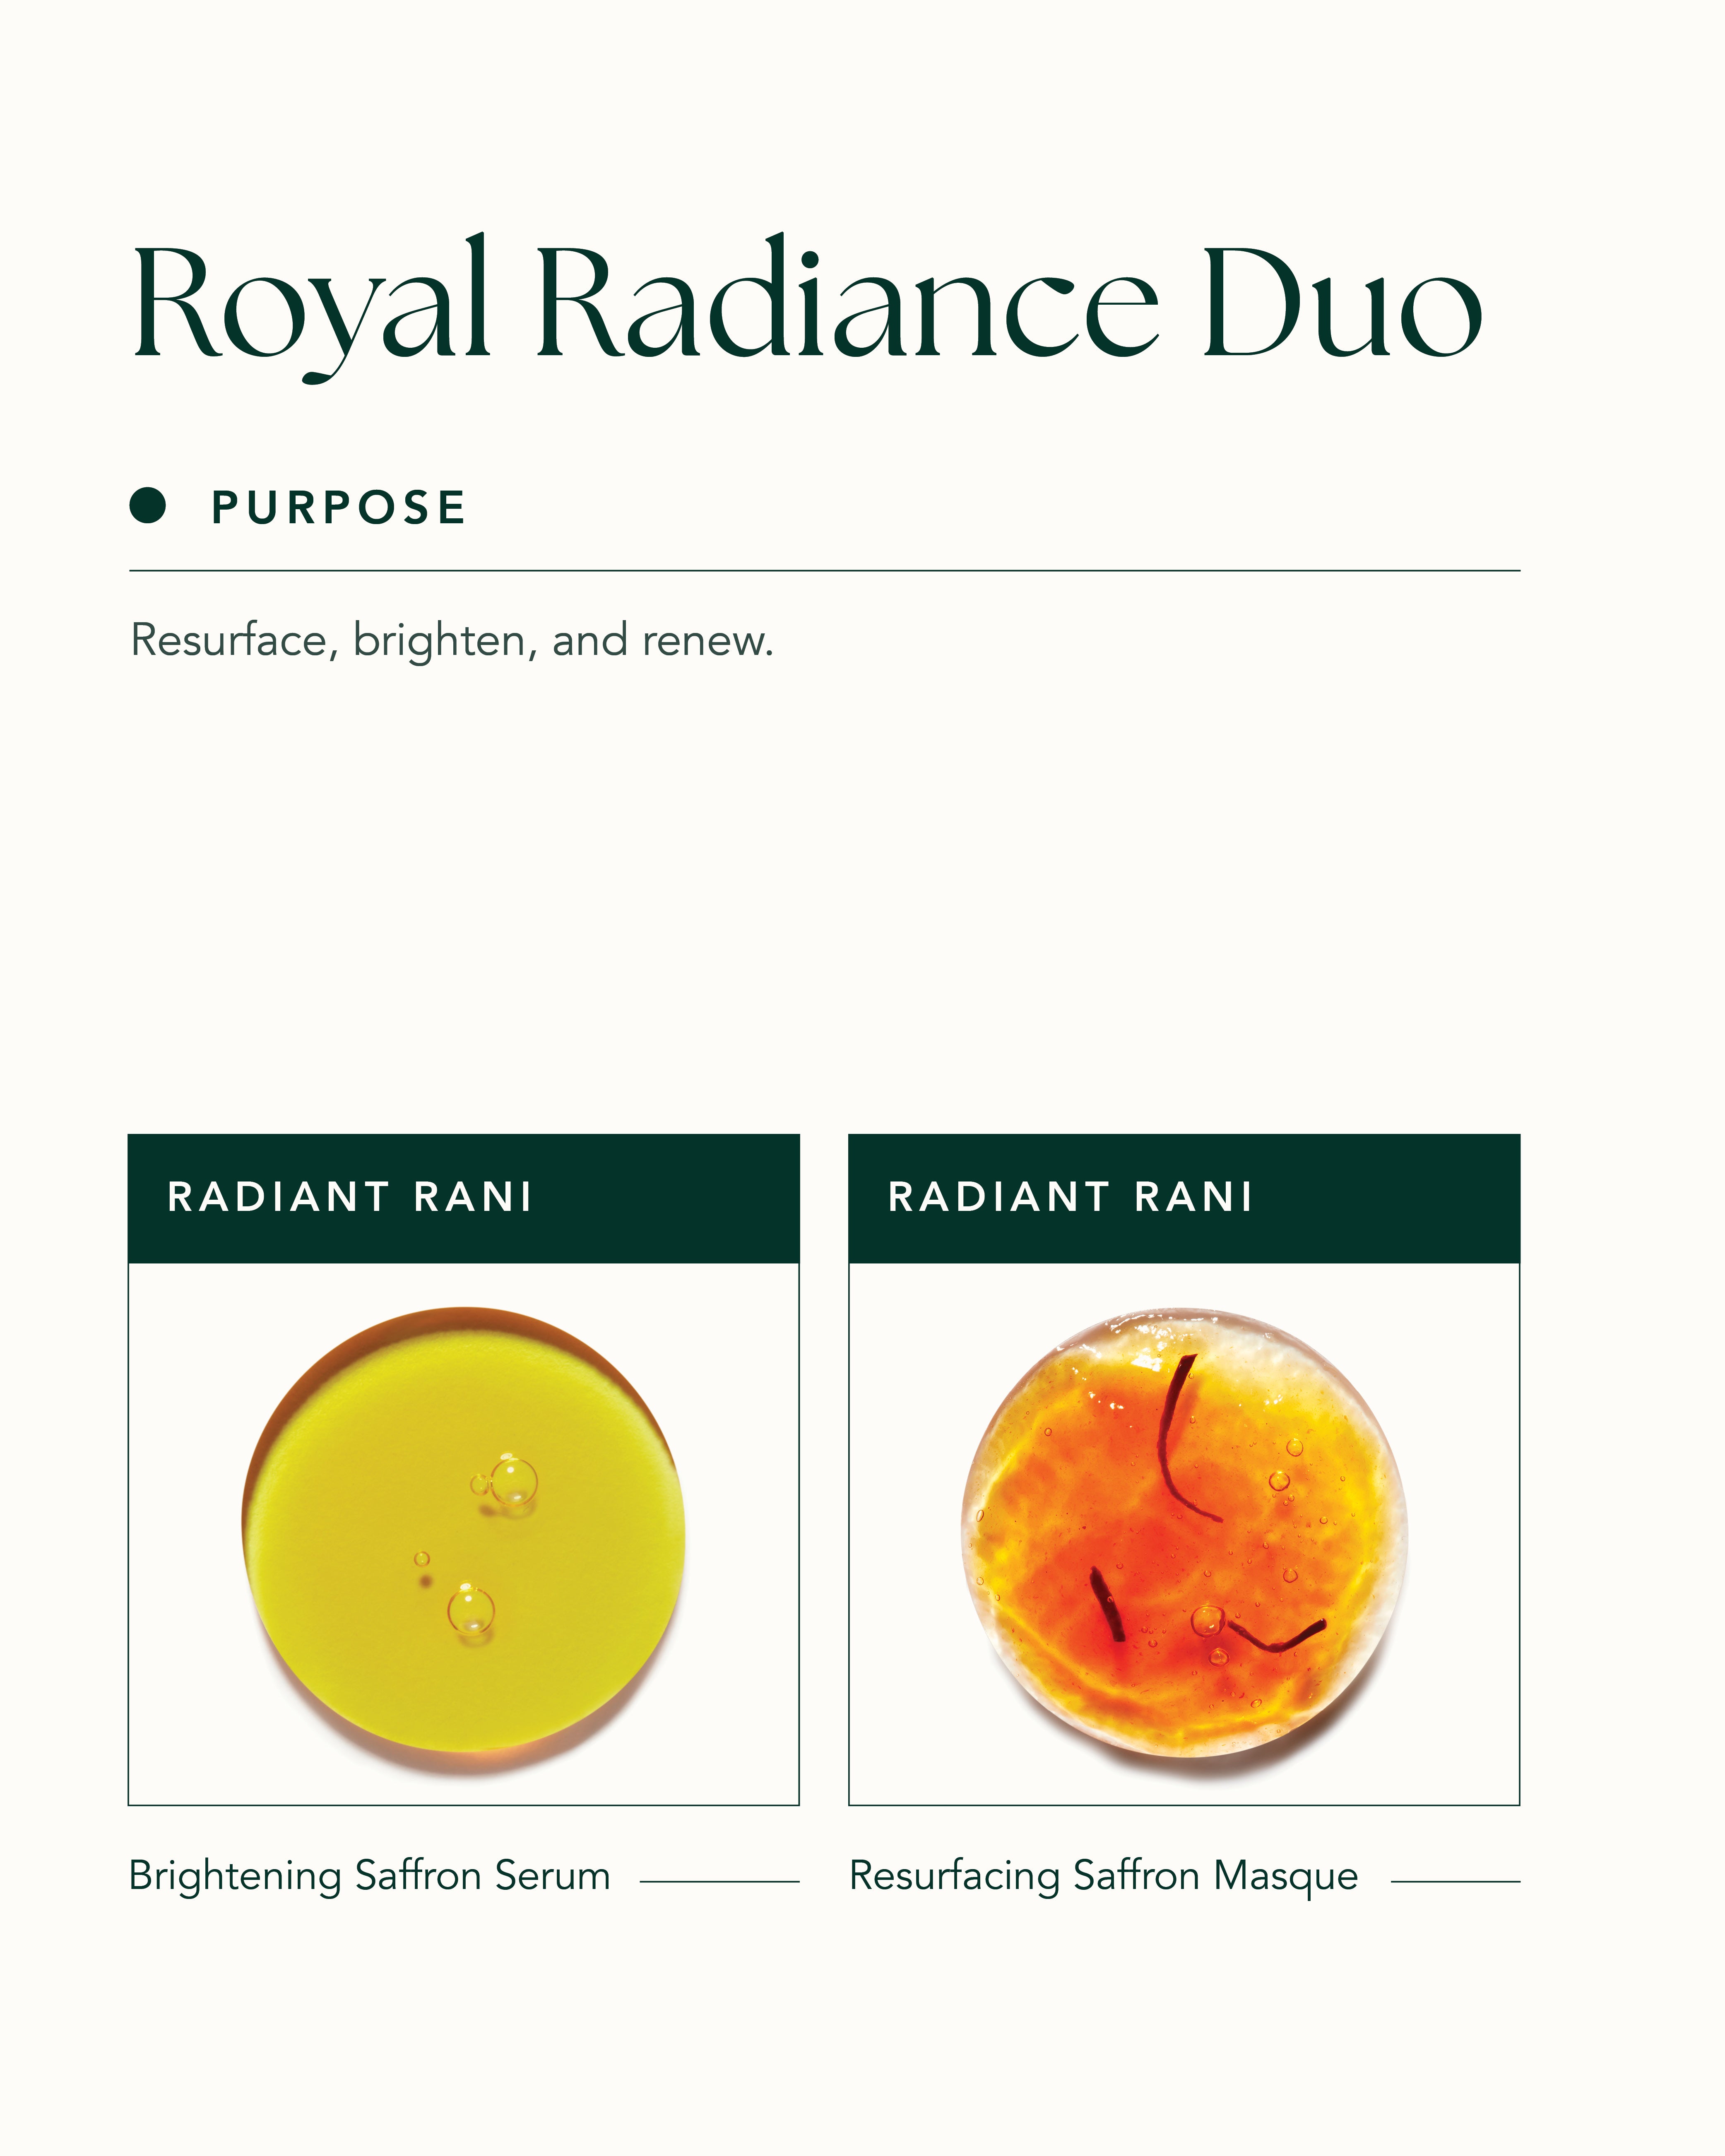 The Royal Radiance Duo